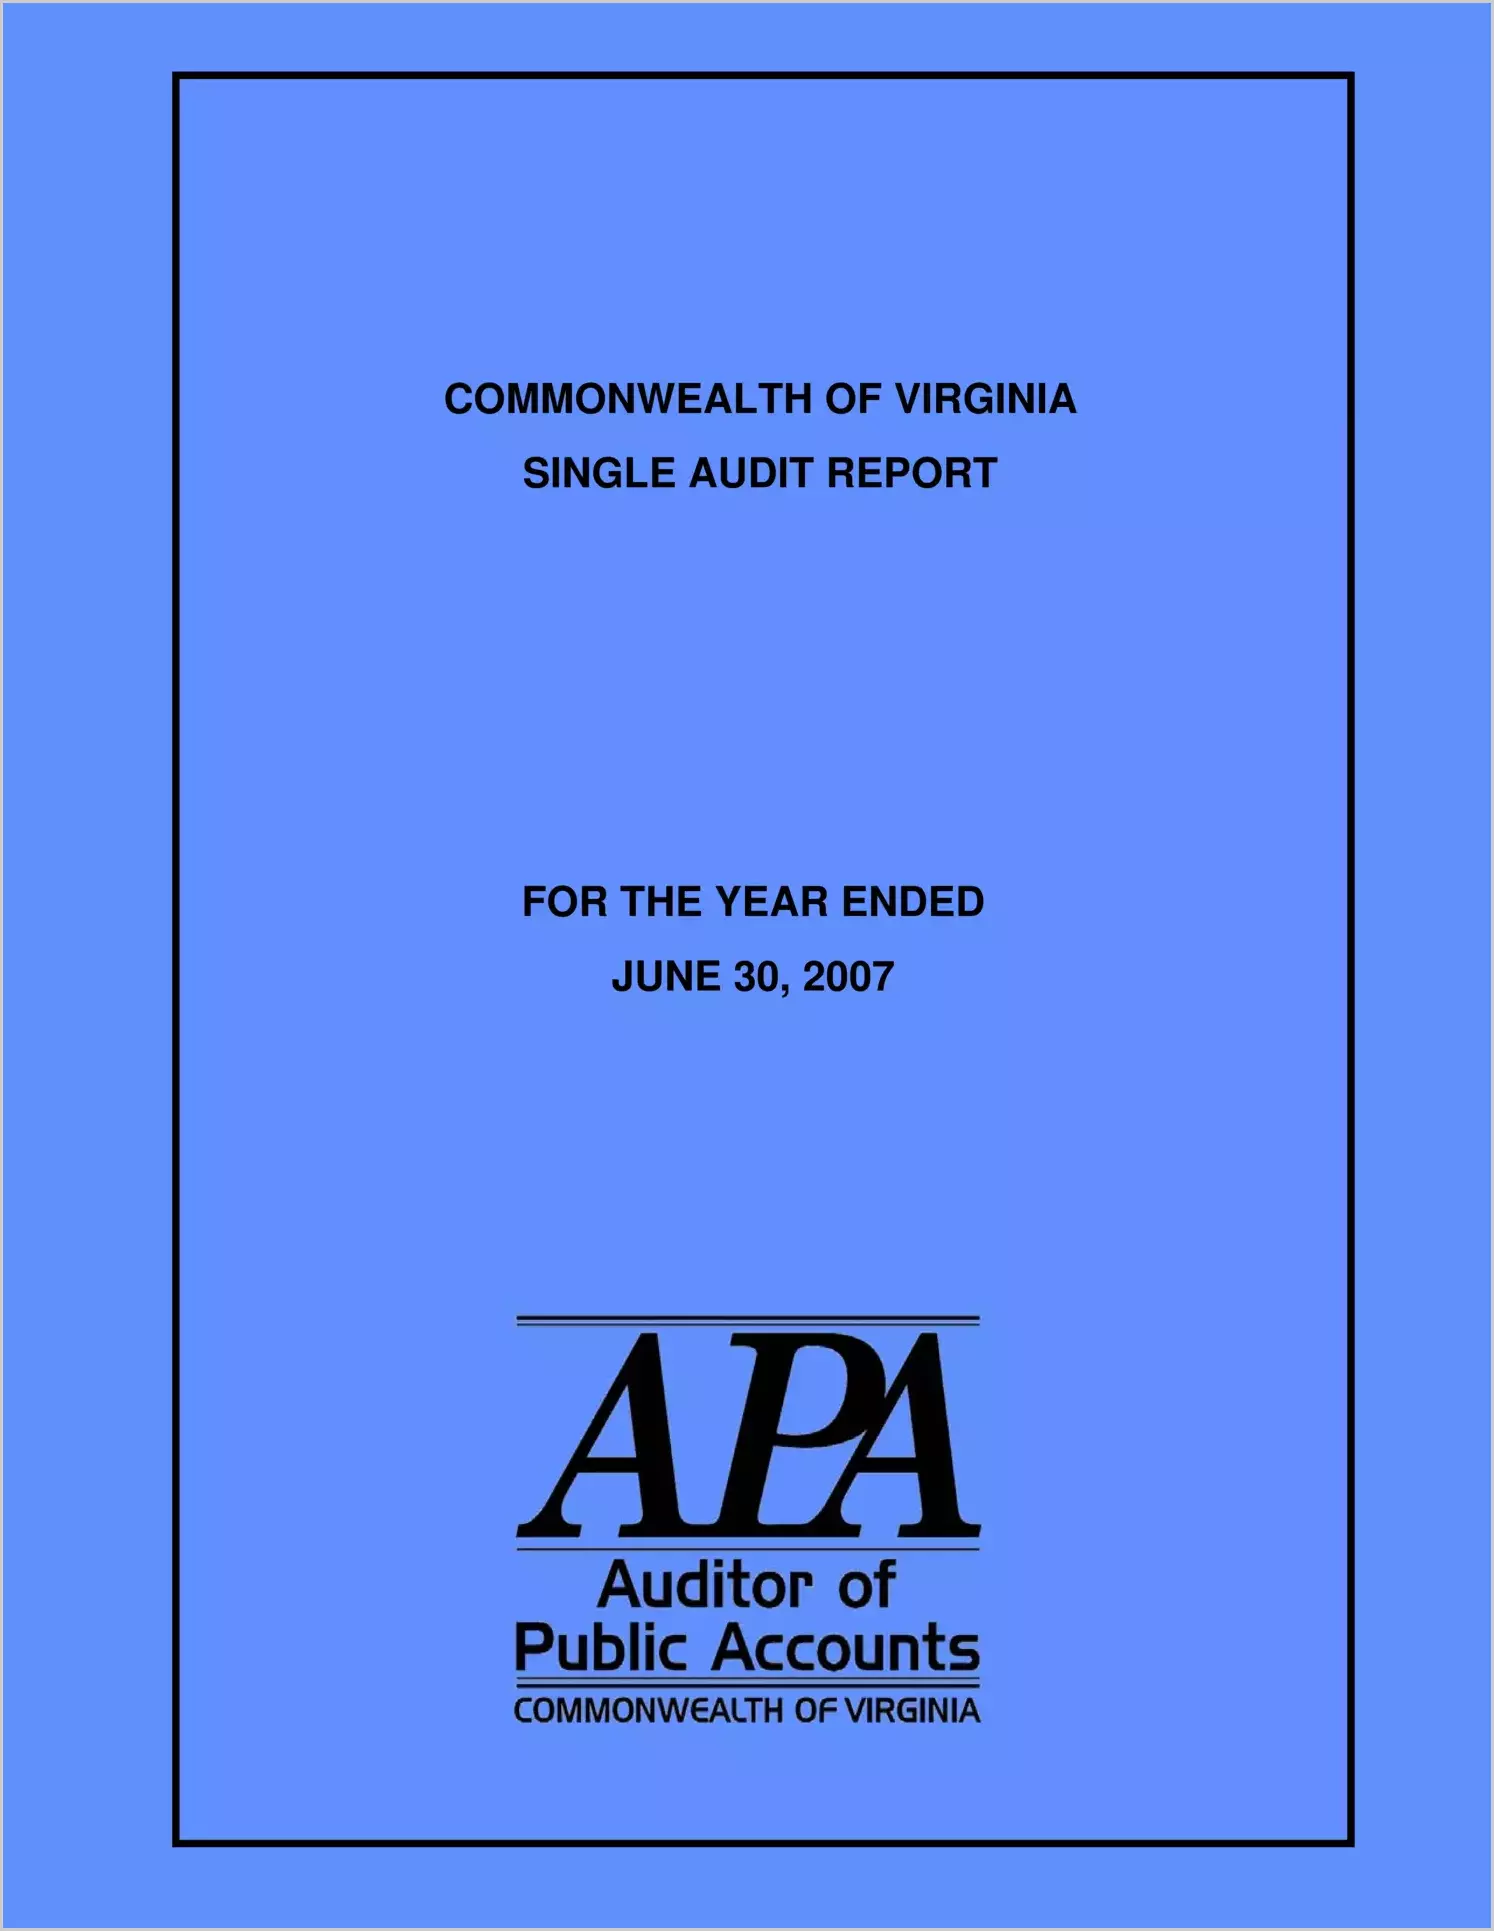 Commonwealth of Virginia Single Audit Report for the Year Ended June 30, 2007